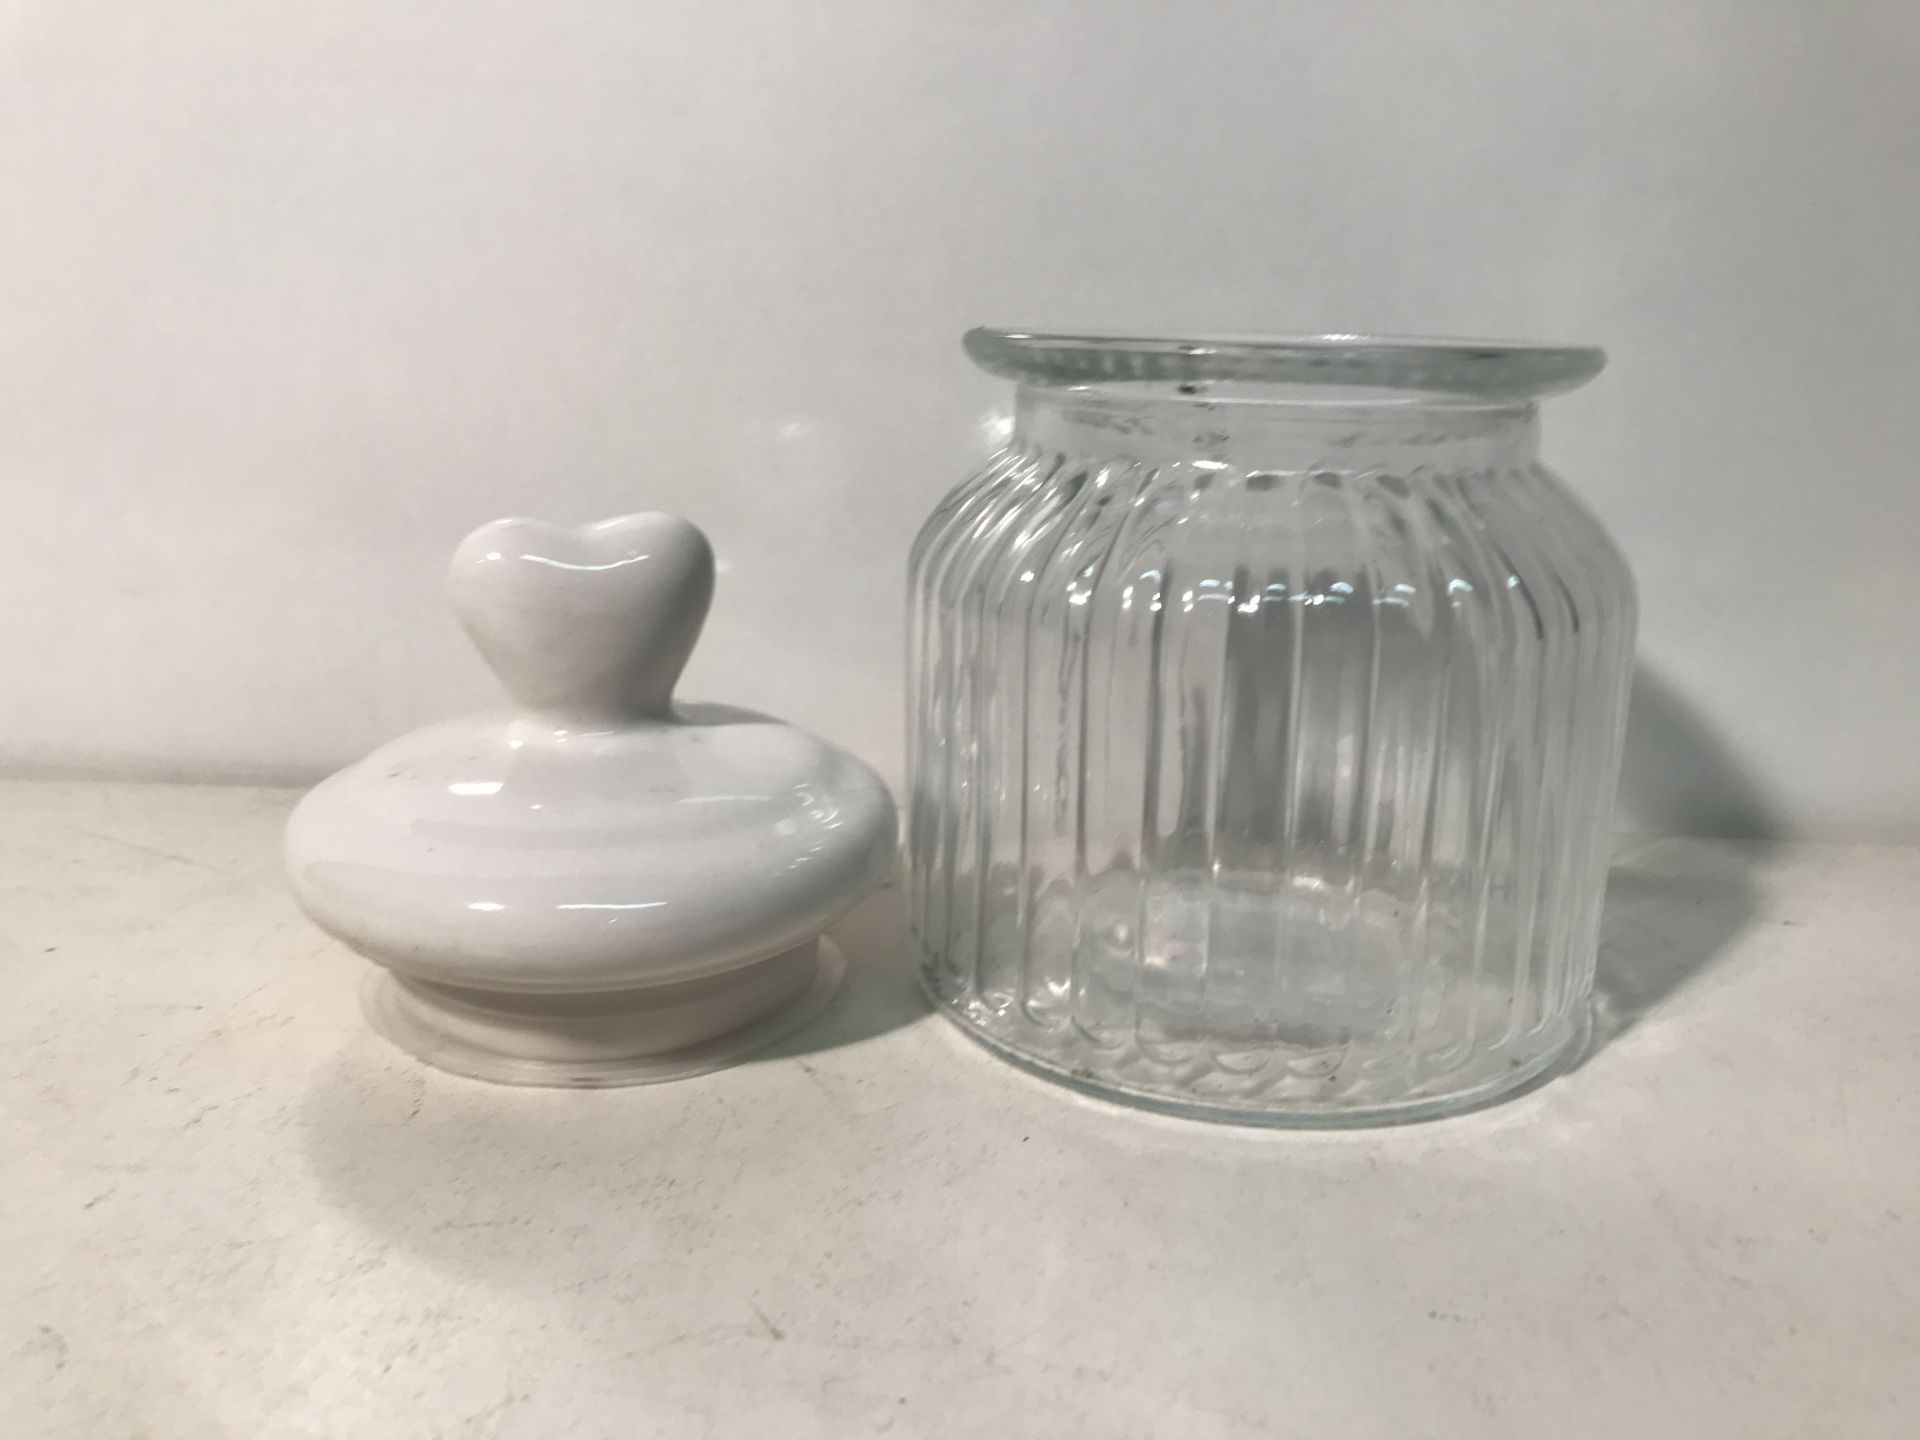 12 x Glass Jars with Porcelain Lids - Image 2 of 3